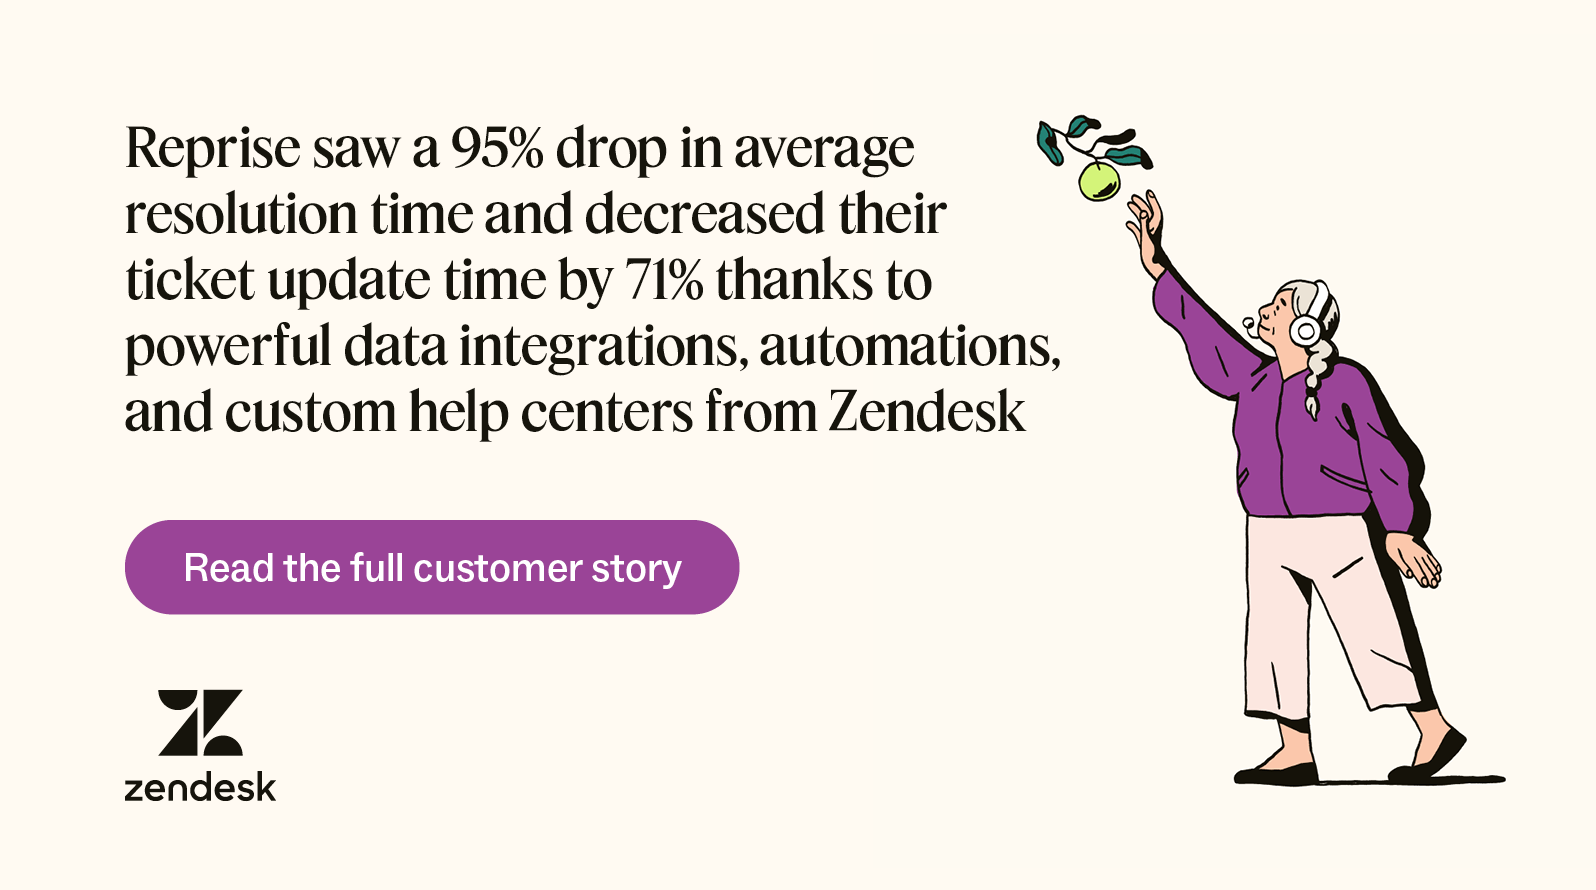 An illustration of a person picking an apple shows how Reprise benefits from using Zendesk for customer service.